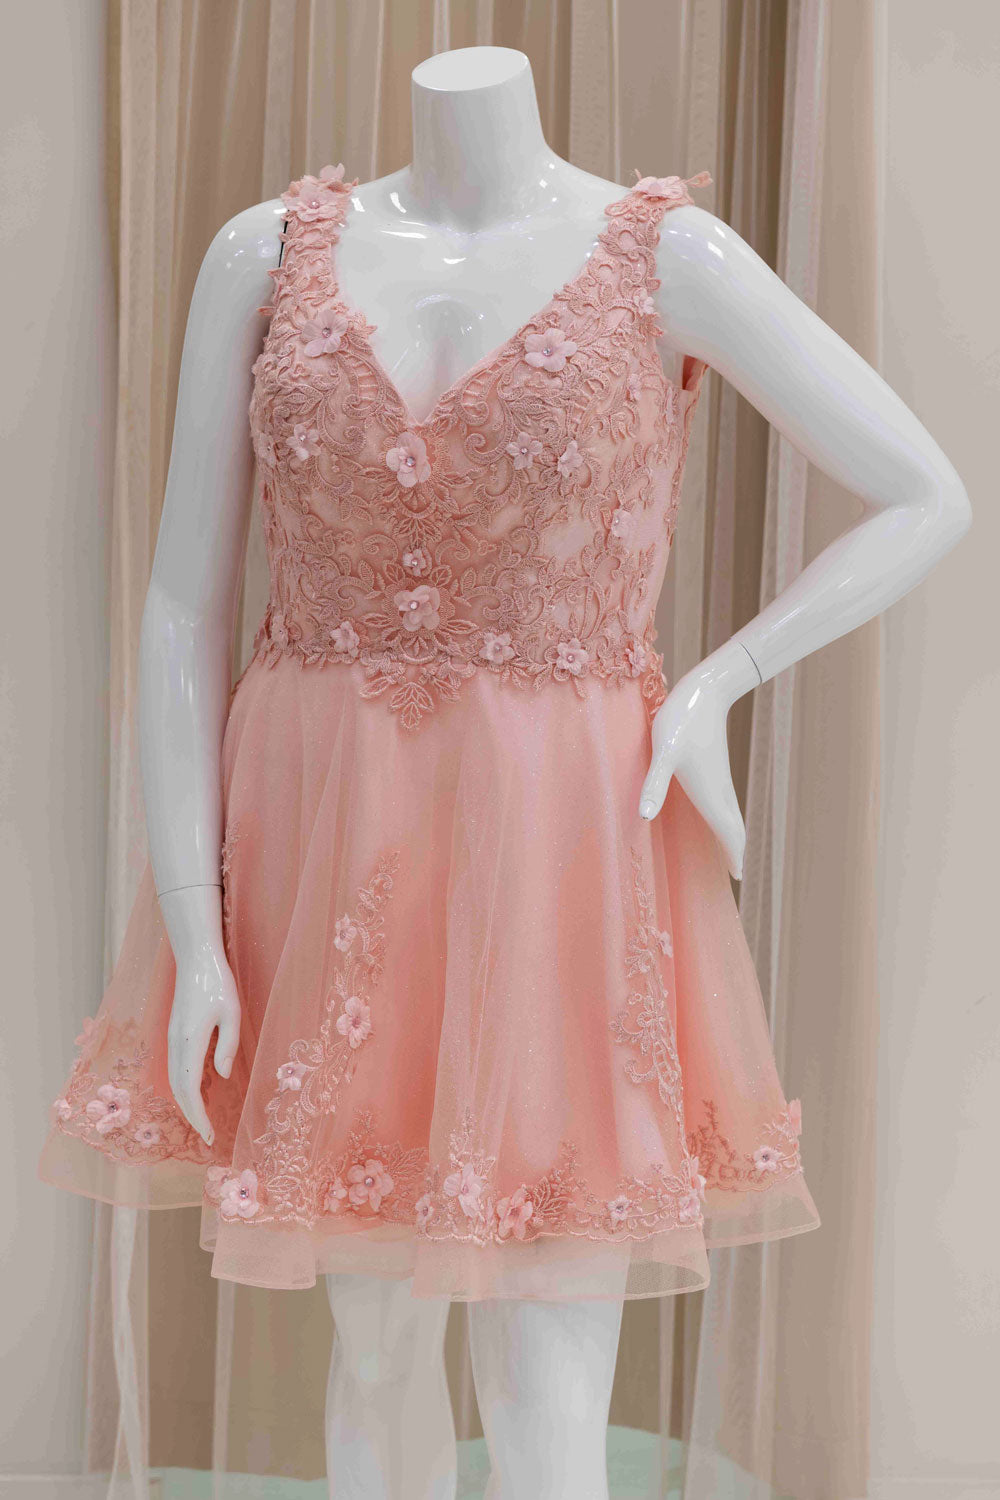 Short Cocktail Dress in Pink for Sweet 16